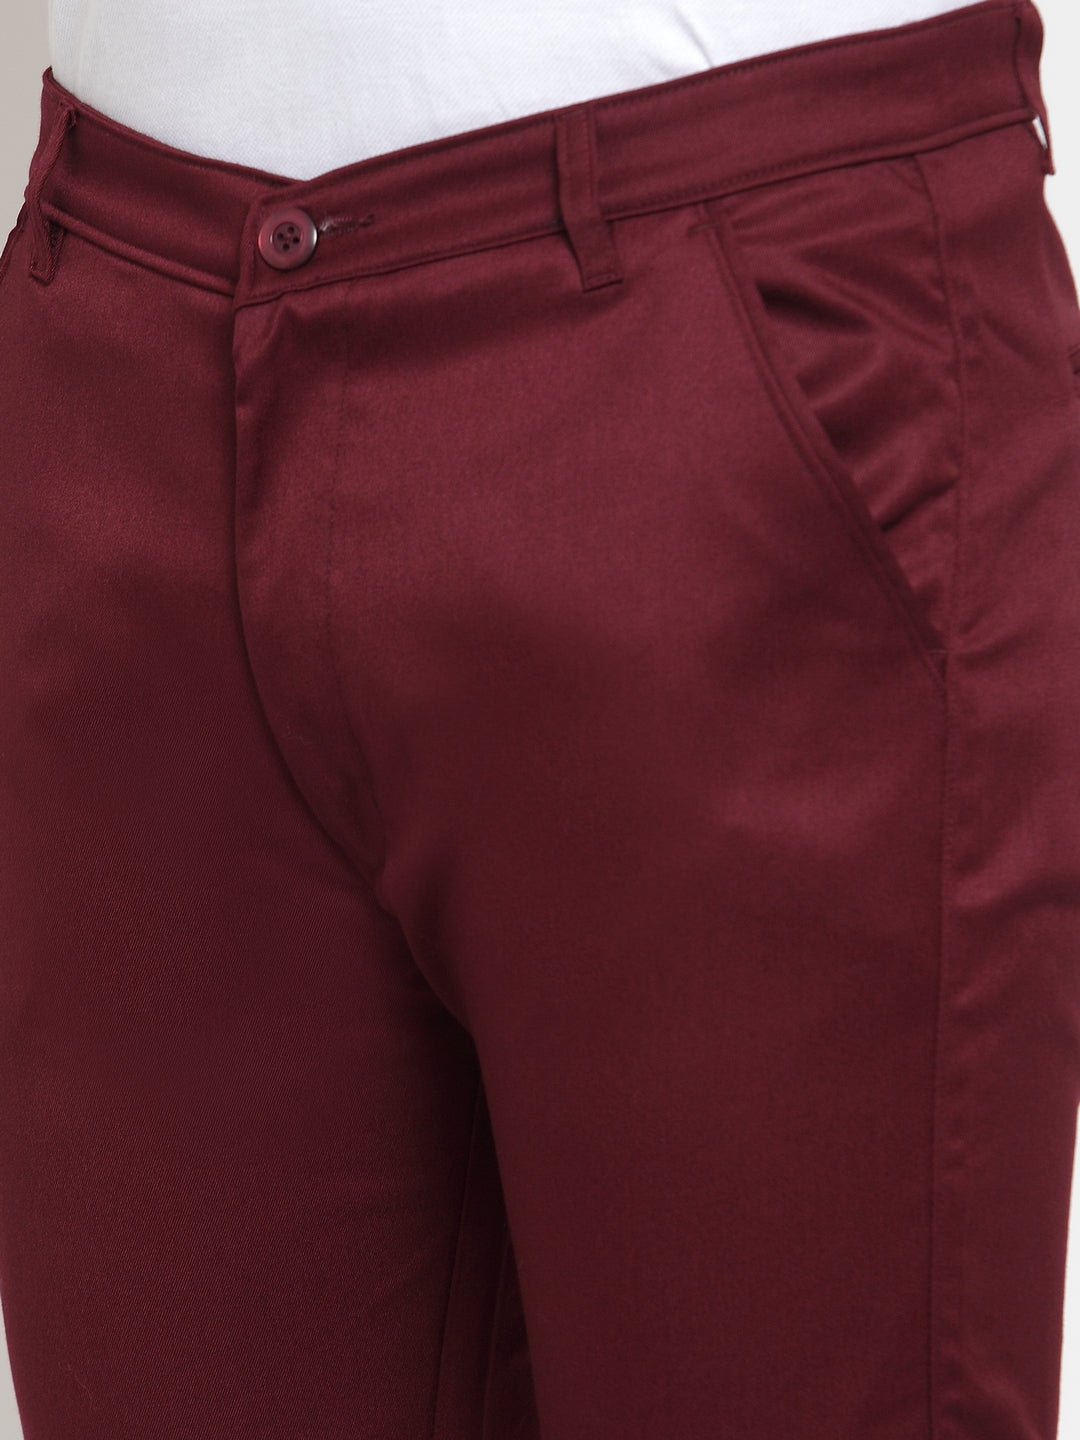 Peter England Jeans Trousers  Chinos Peter England Maroon Trousers for Men  at Peterenglandcom